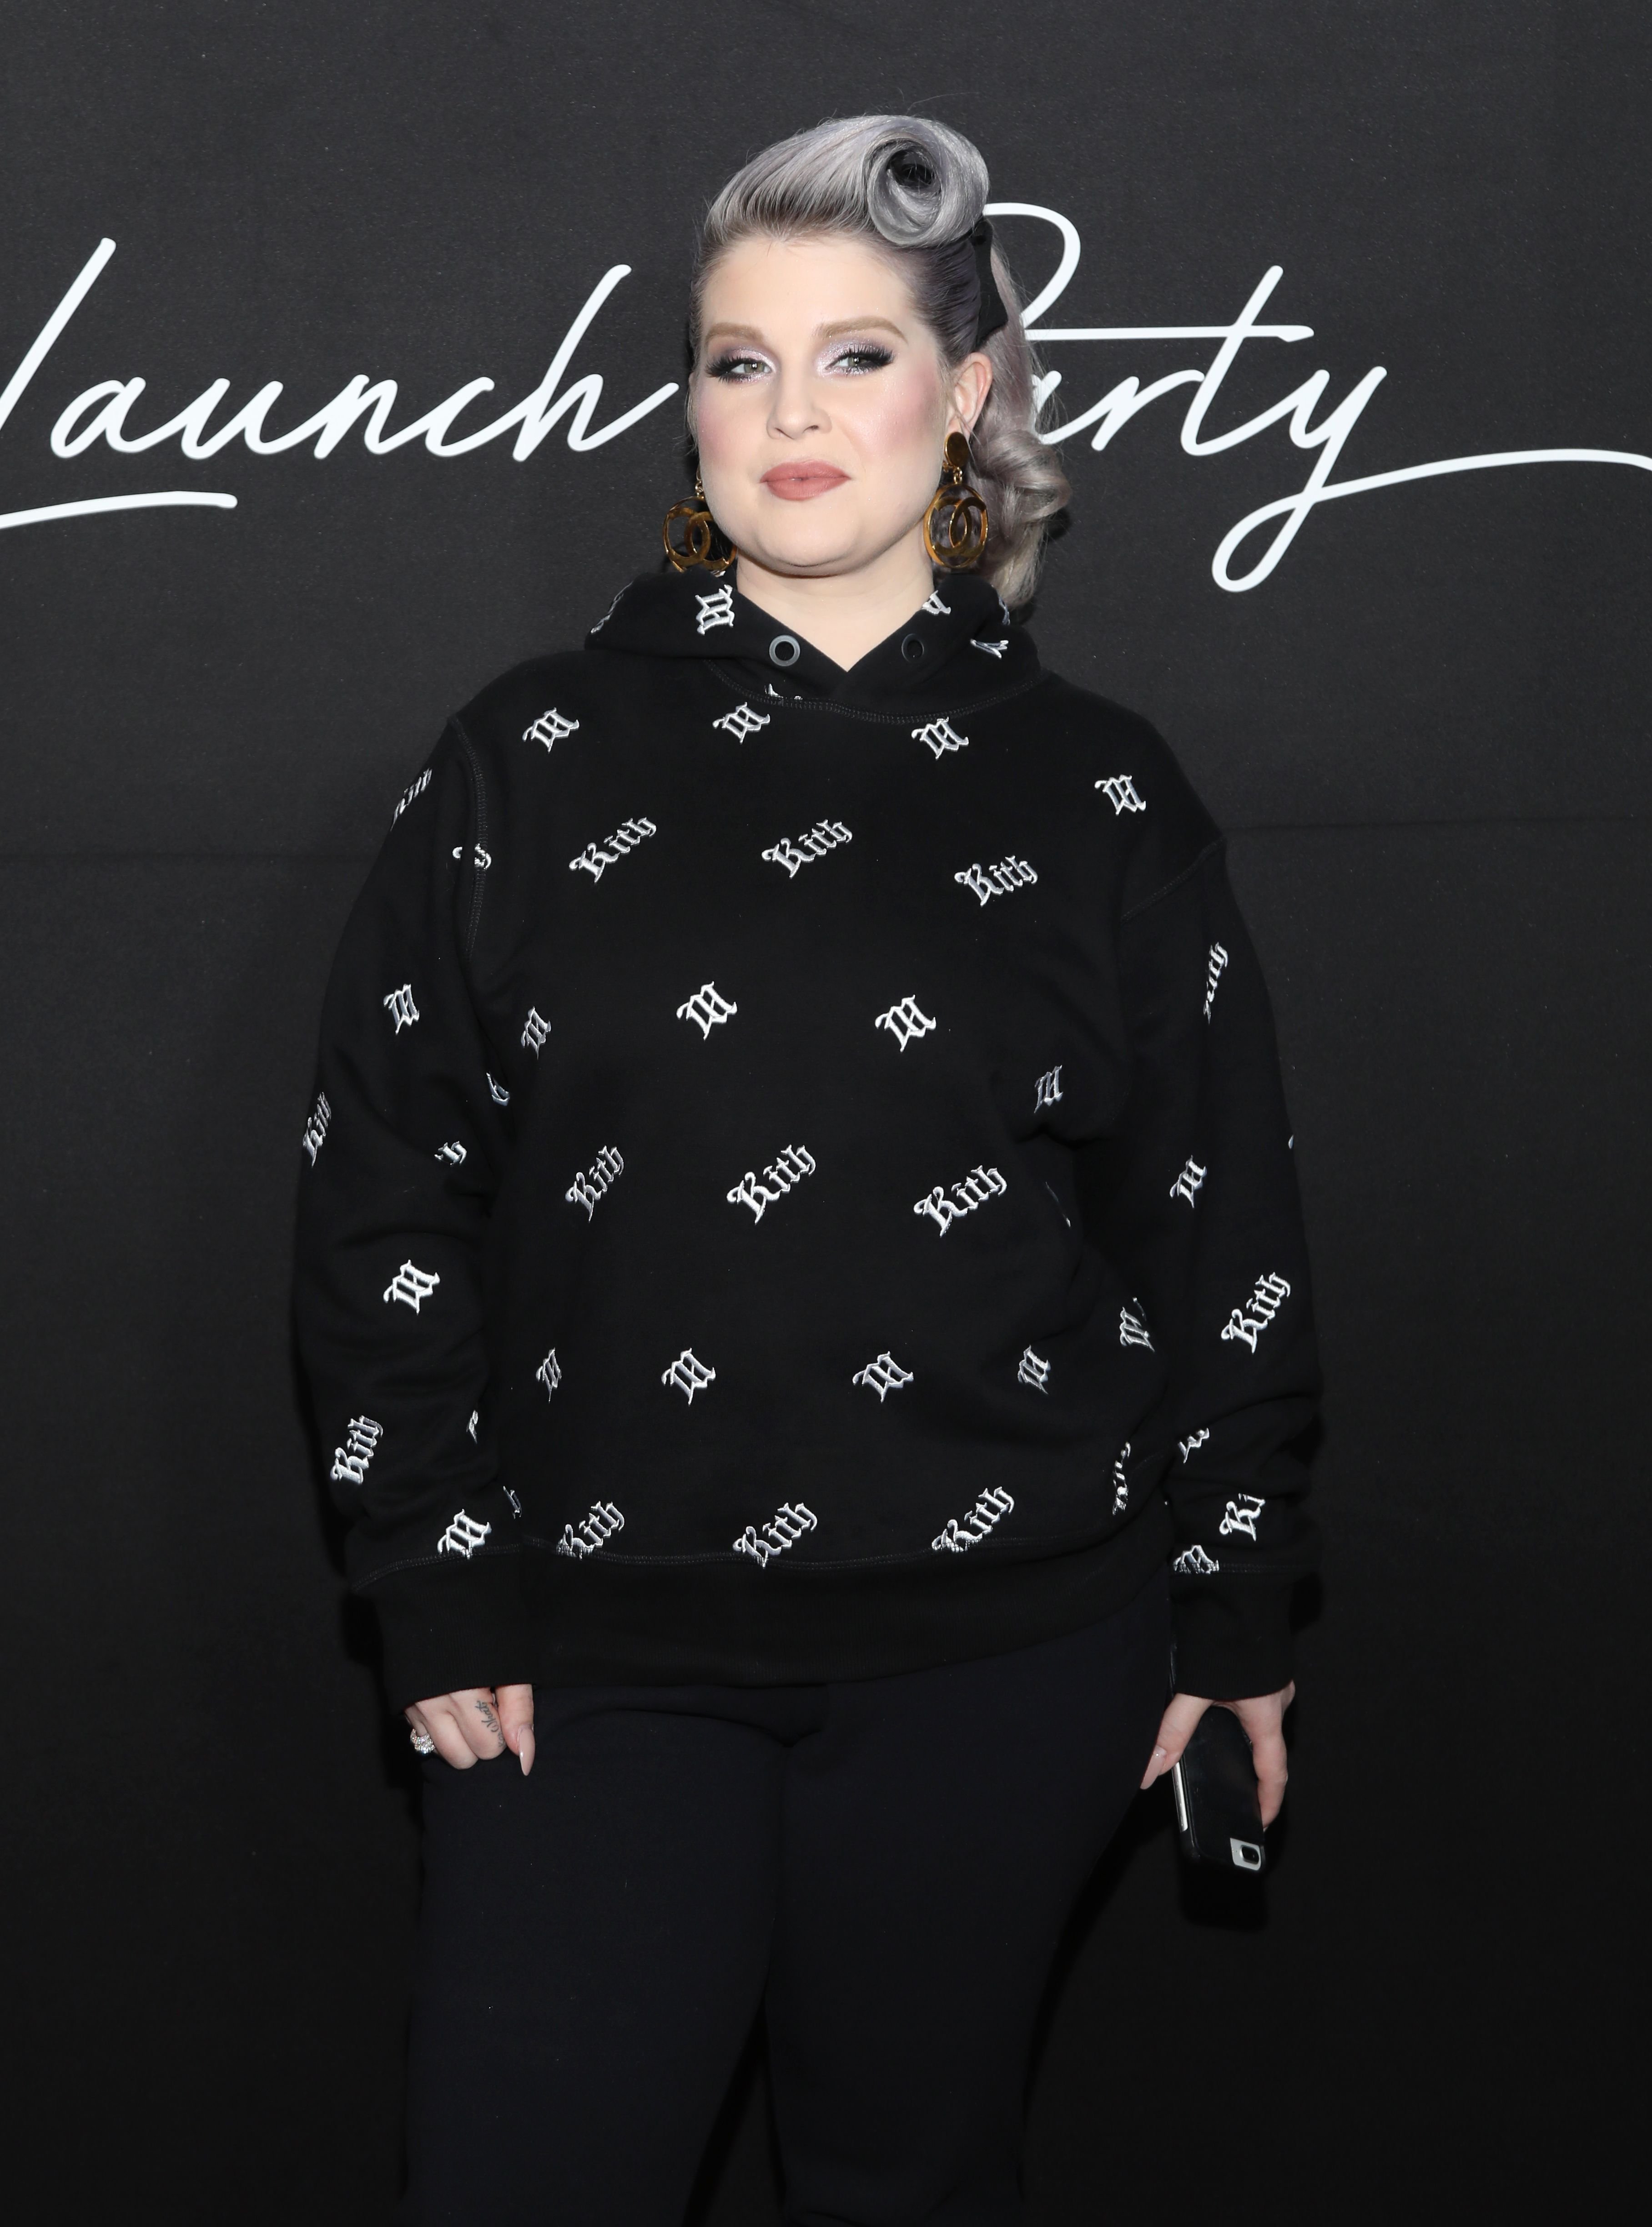 Kelly Osbourne at the Wheels Los Angeles launch at Sunset Tower on March 14, 2019, in California | Photo: Getty Images